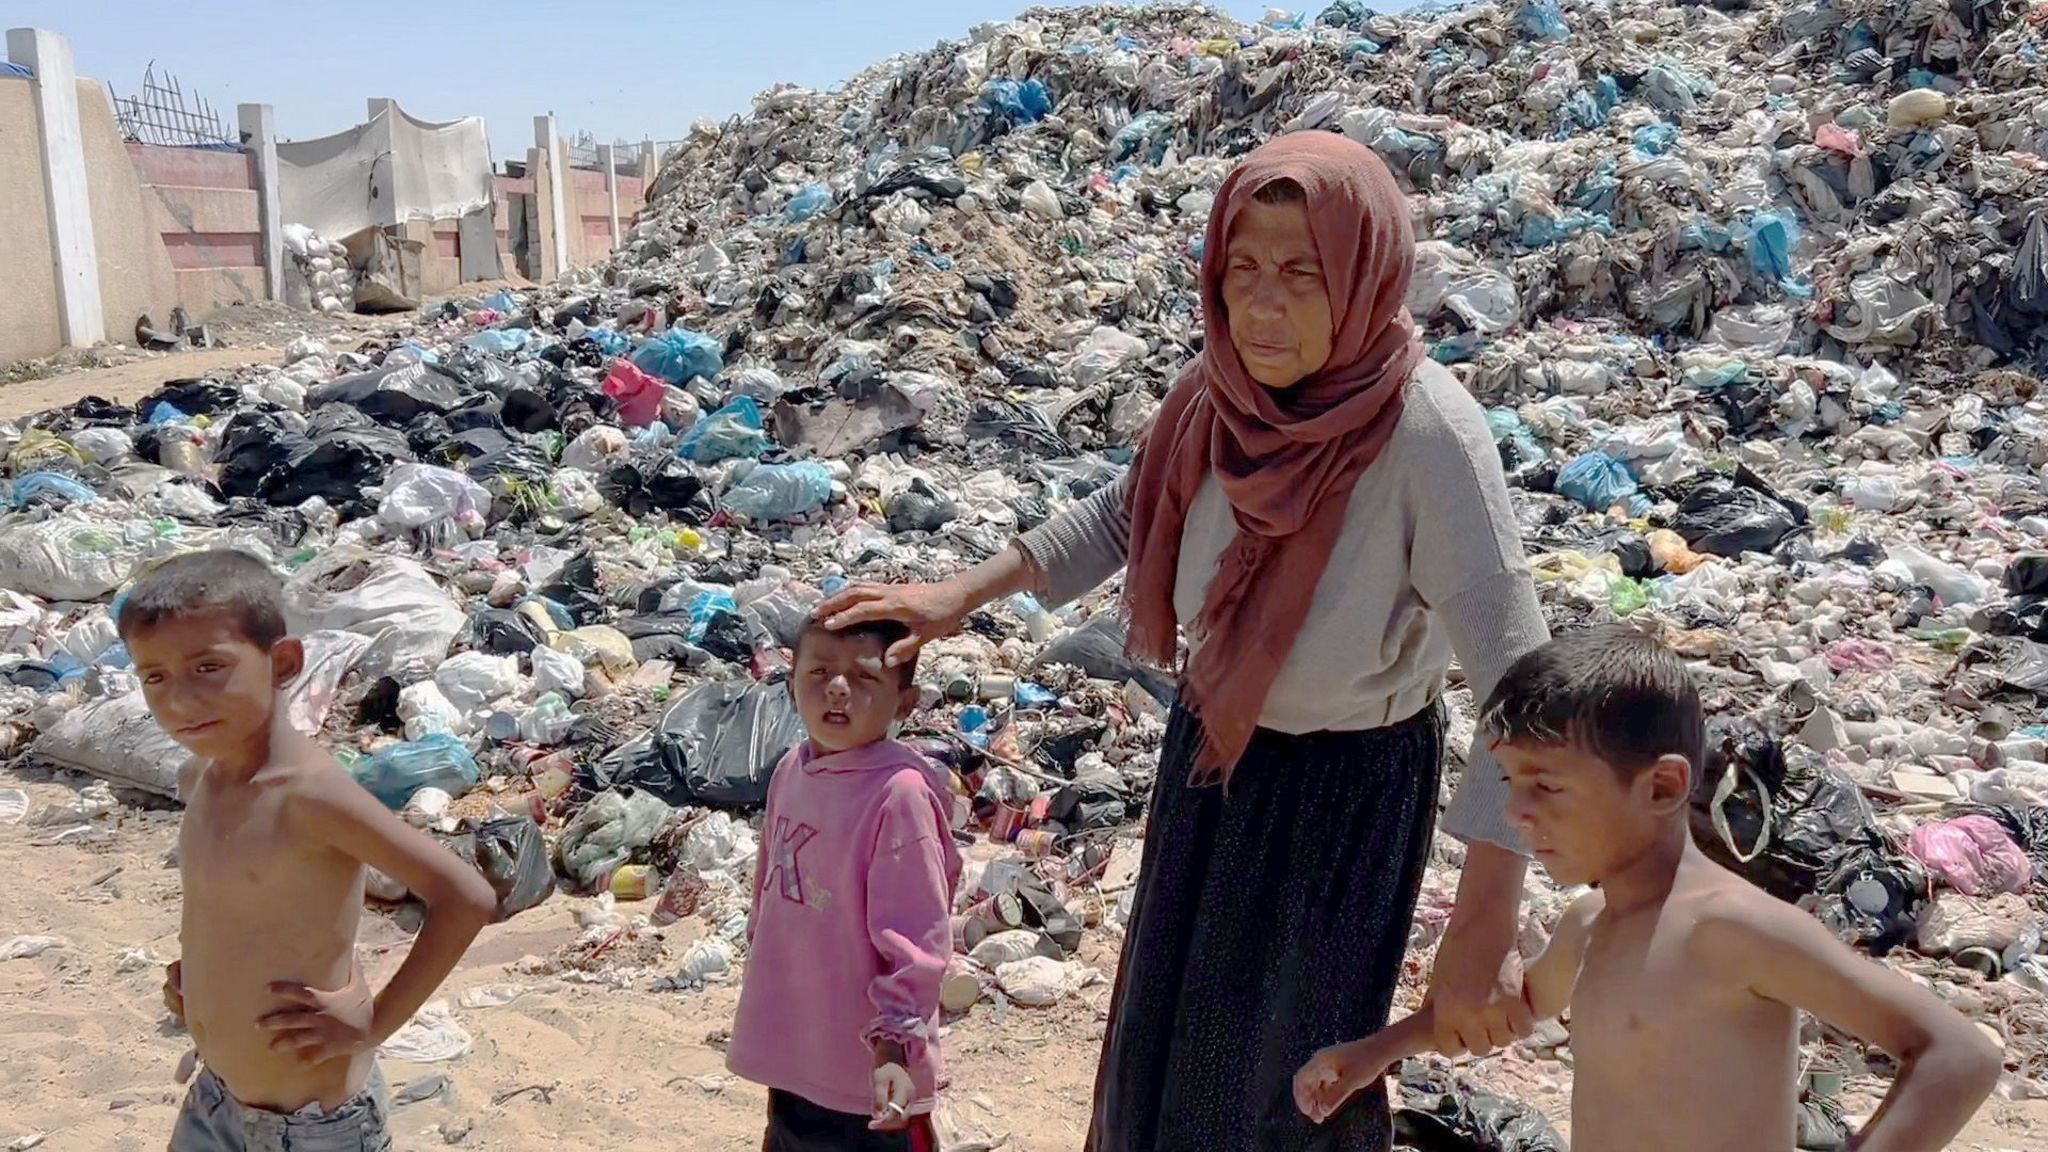 Asmahan stands with three of her grandchildren in front of a giant rubbish heap